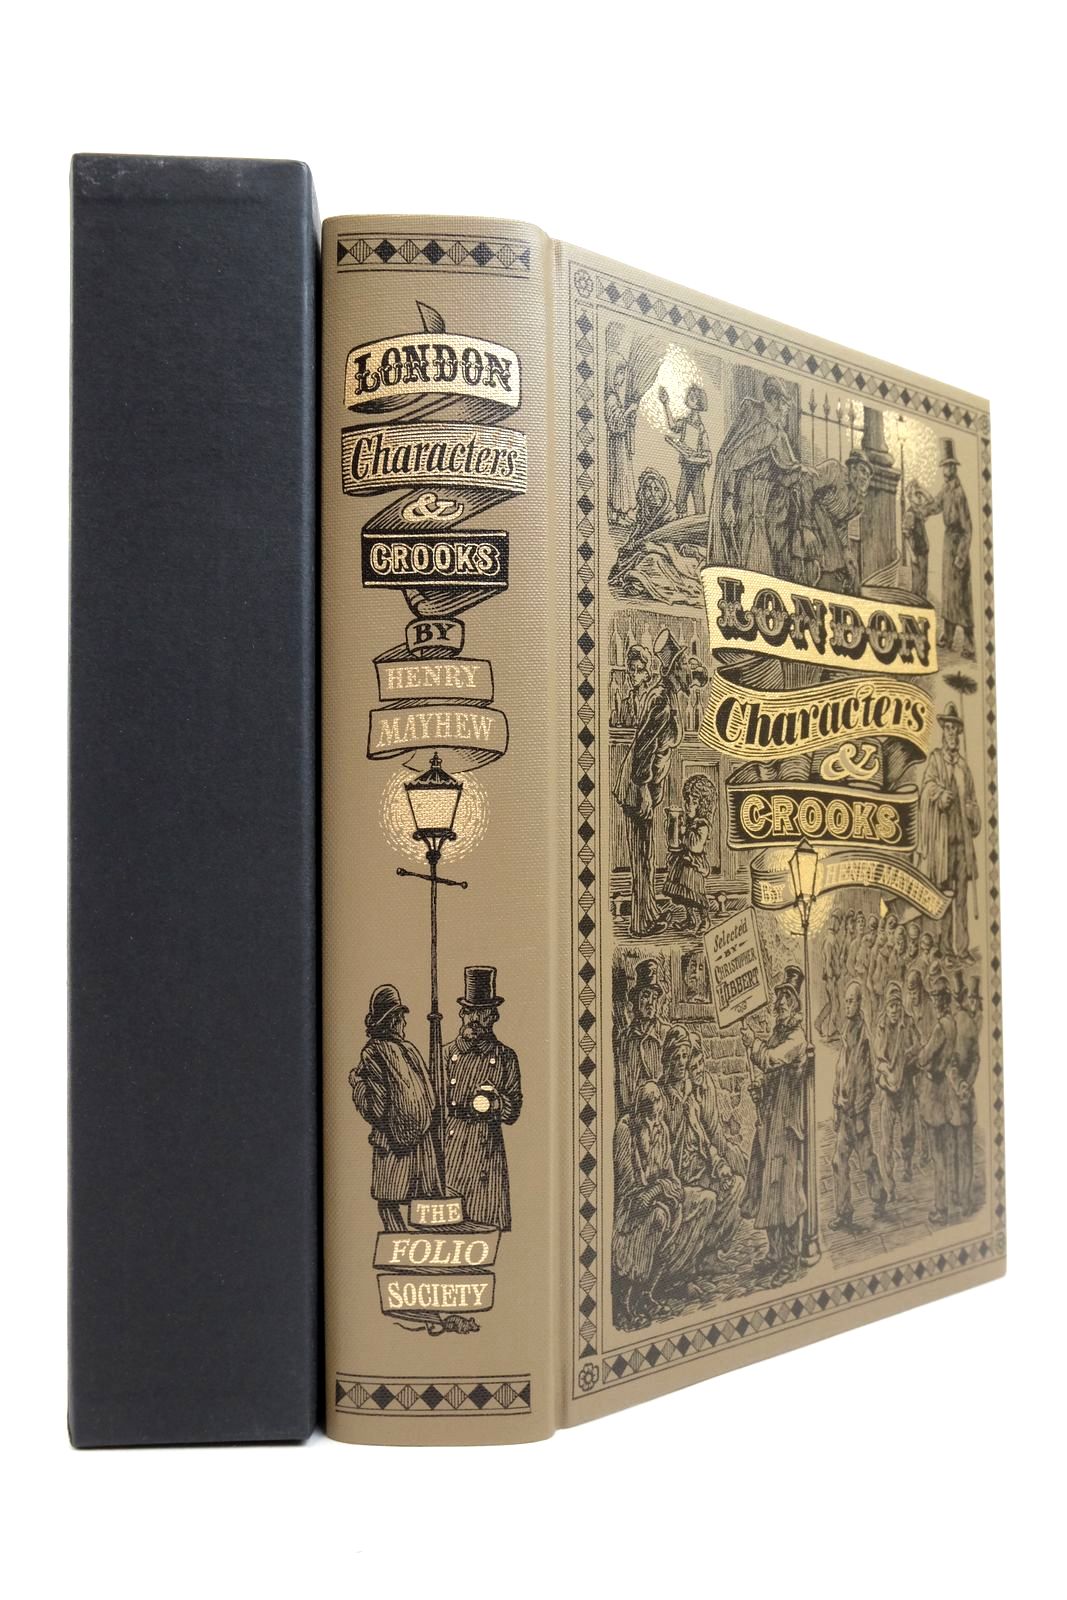 Photo of LONDON CHARACTERS AND CROOKS written by Mayhew, Henry Hibbert, Christopher published by Folio Society (STOCK CODE: 2137837)  for sale by Stella & Rose's Books